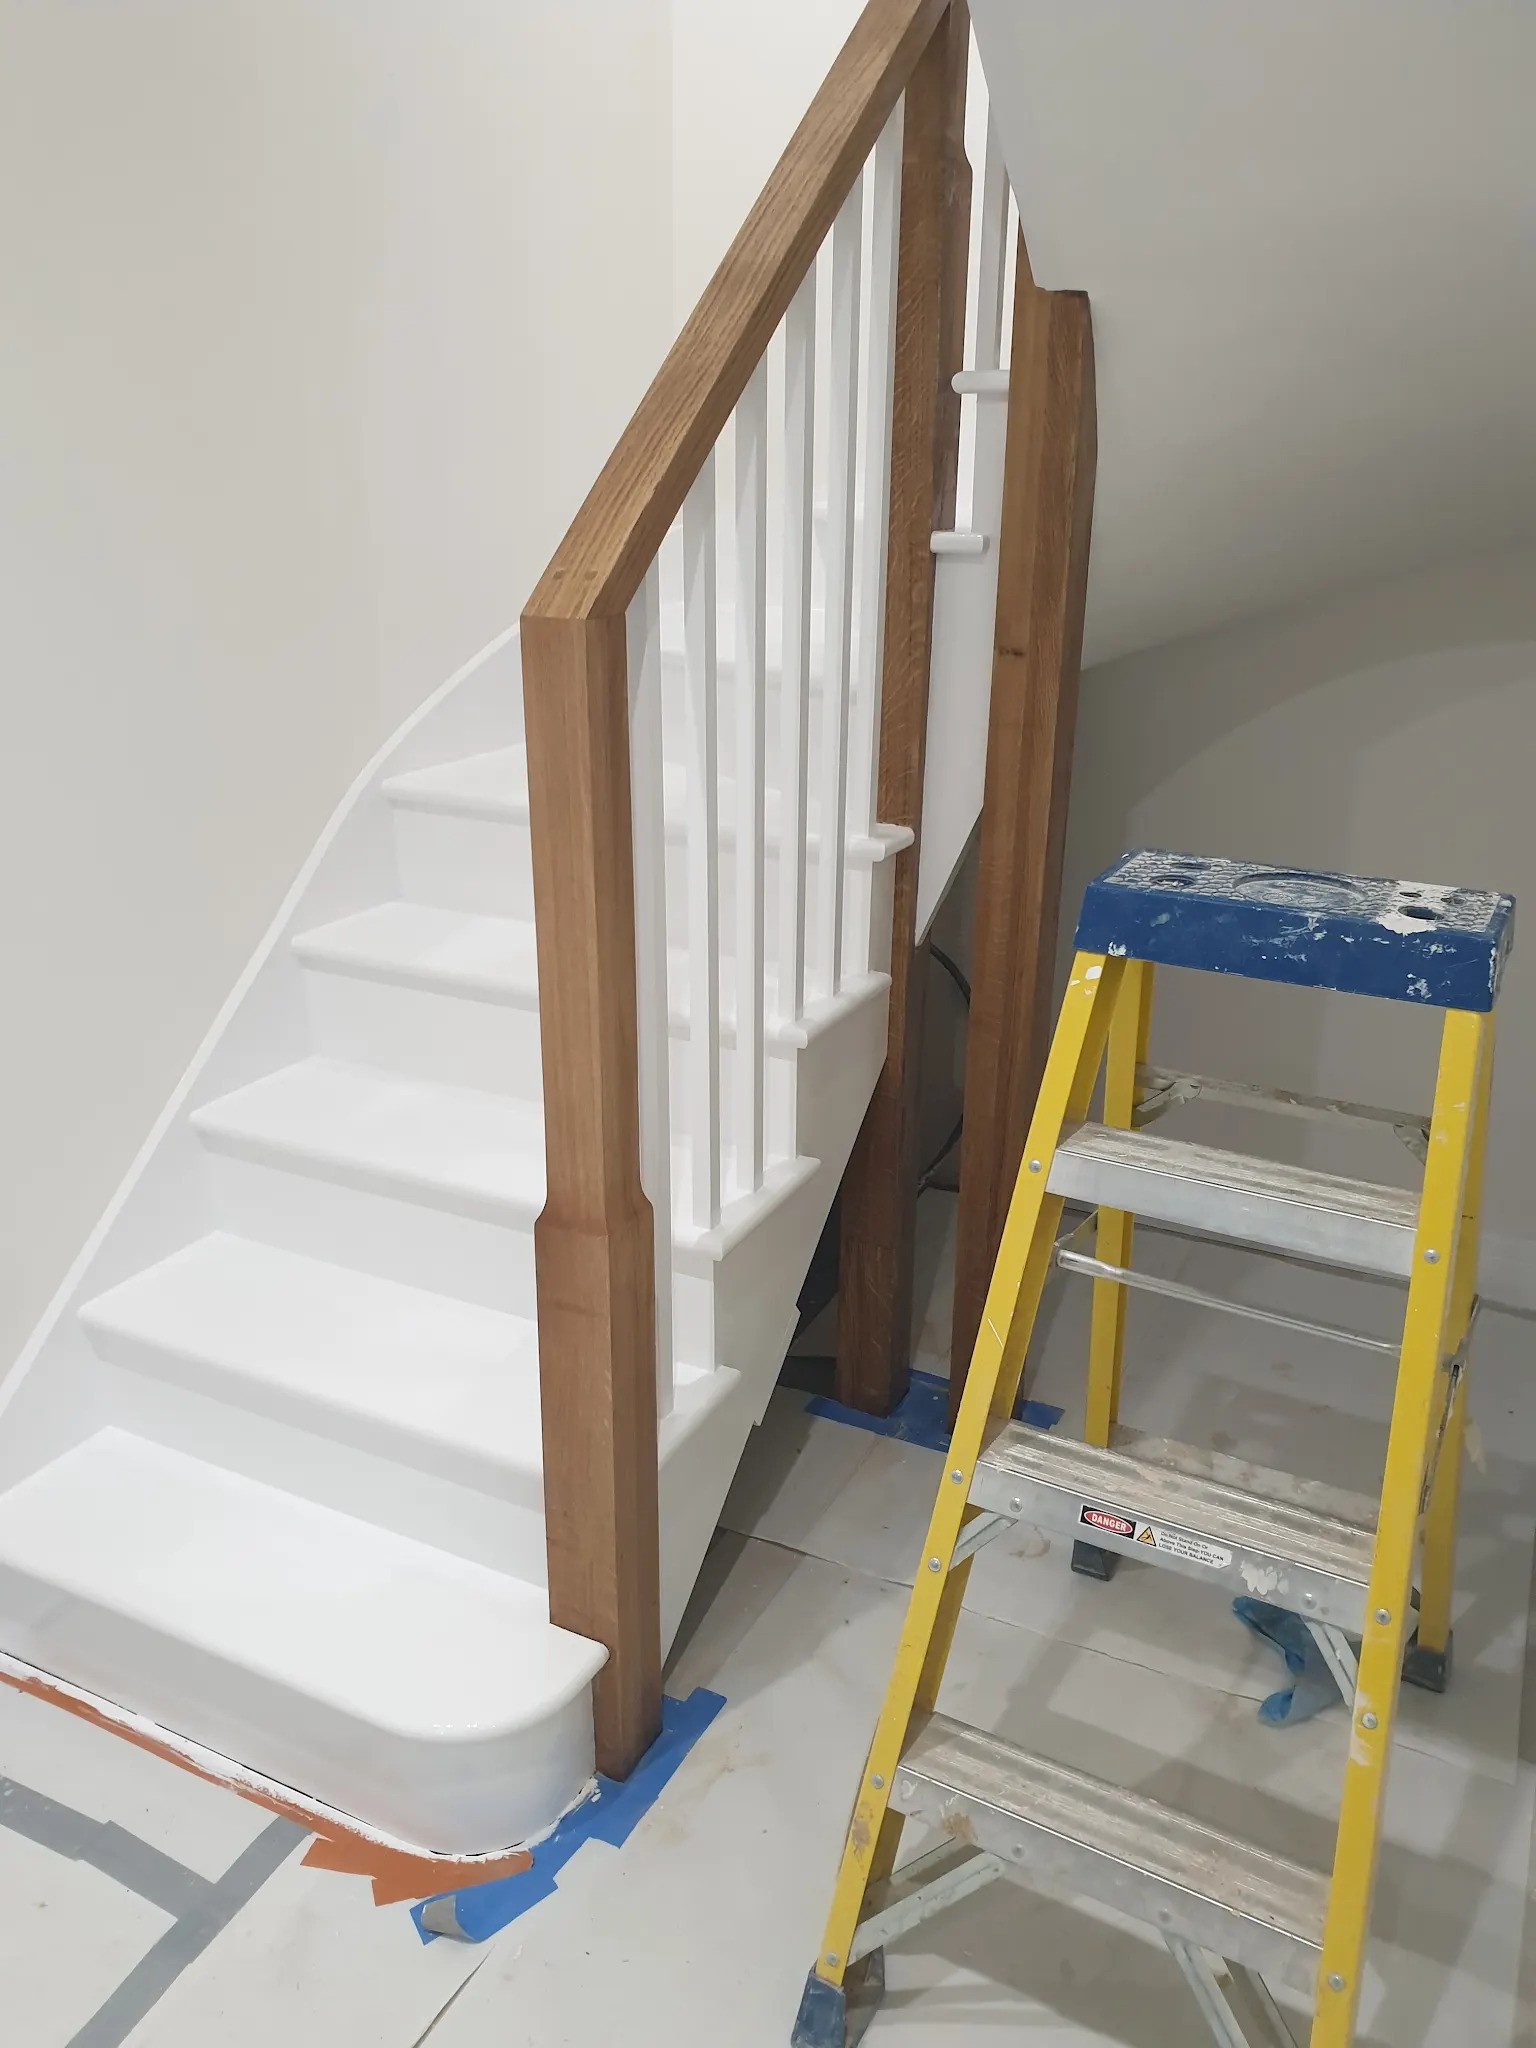 Staircase finished in white and varnished oak